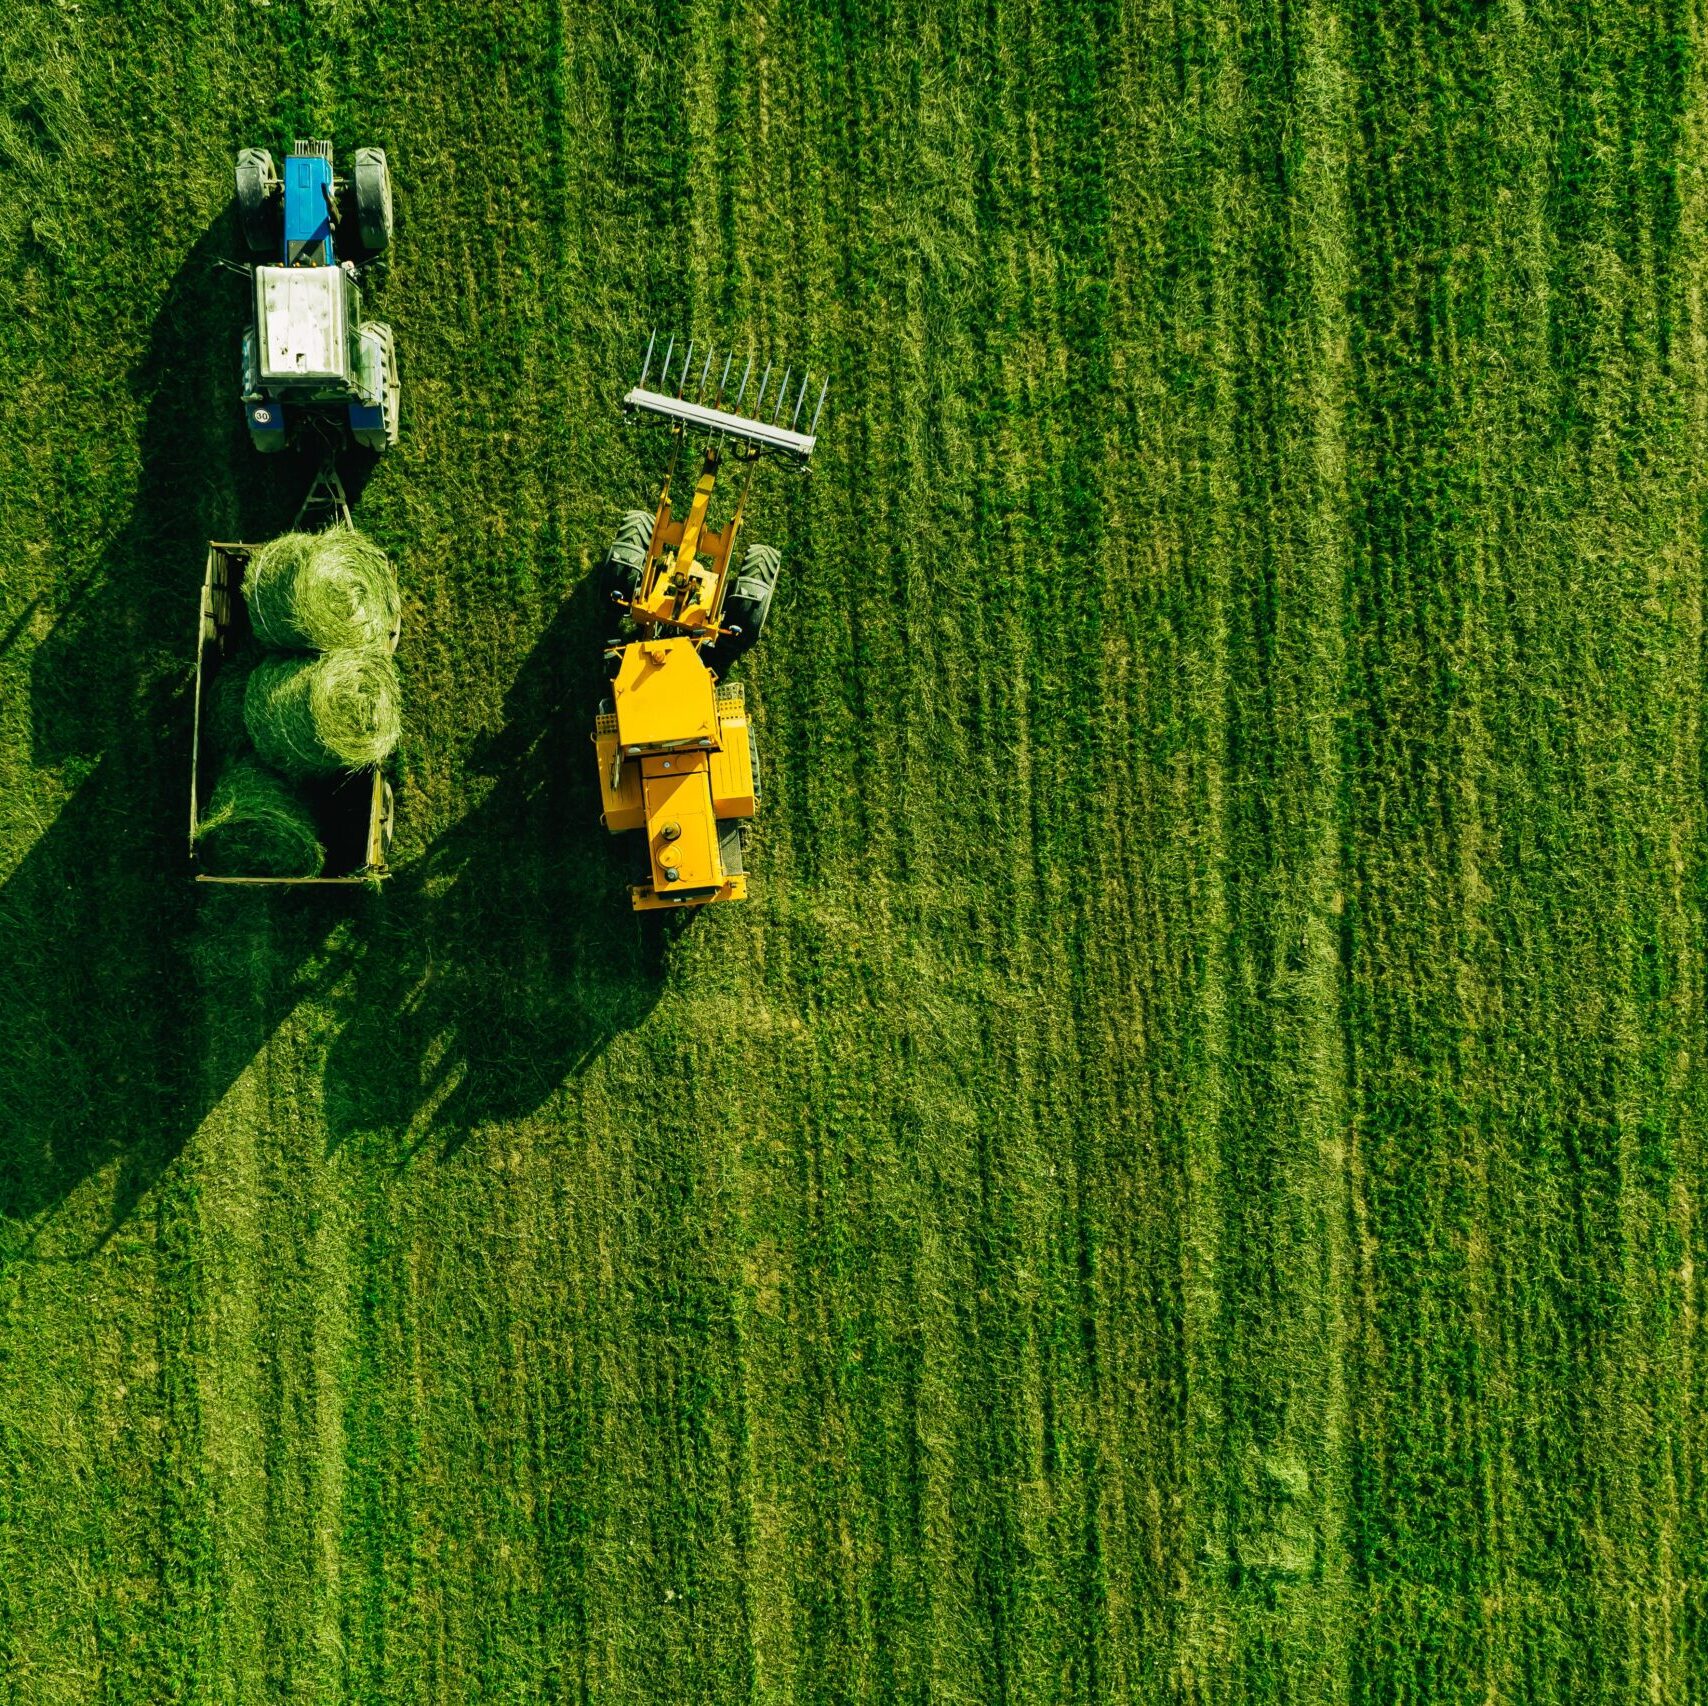 Aerial view of green grass harvest field with tractor moving hay bale